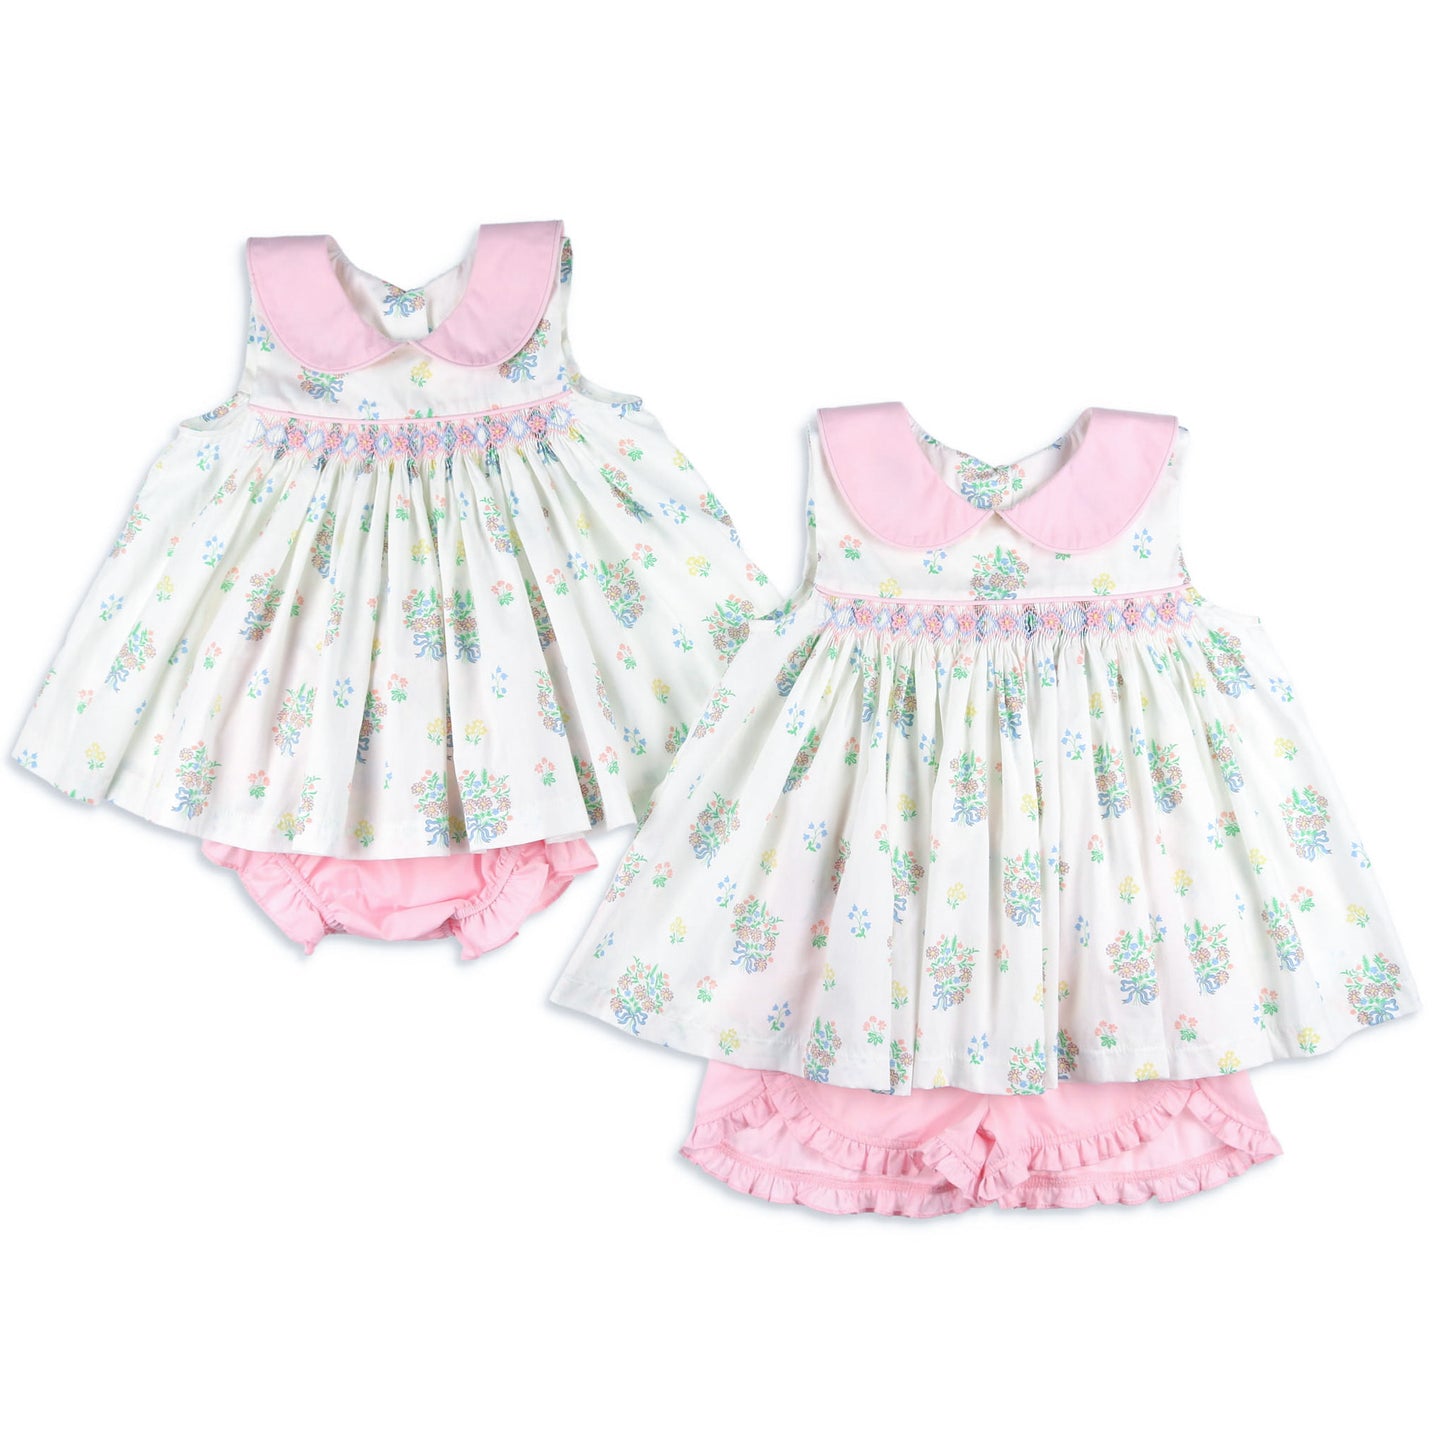 two shots of the little girls clothing set